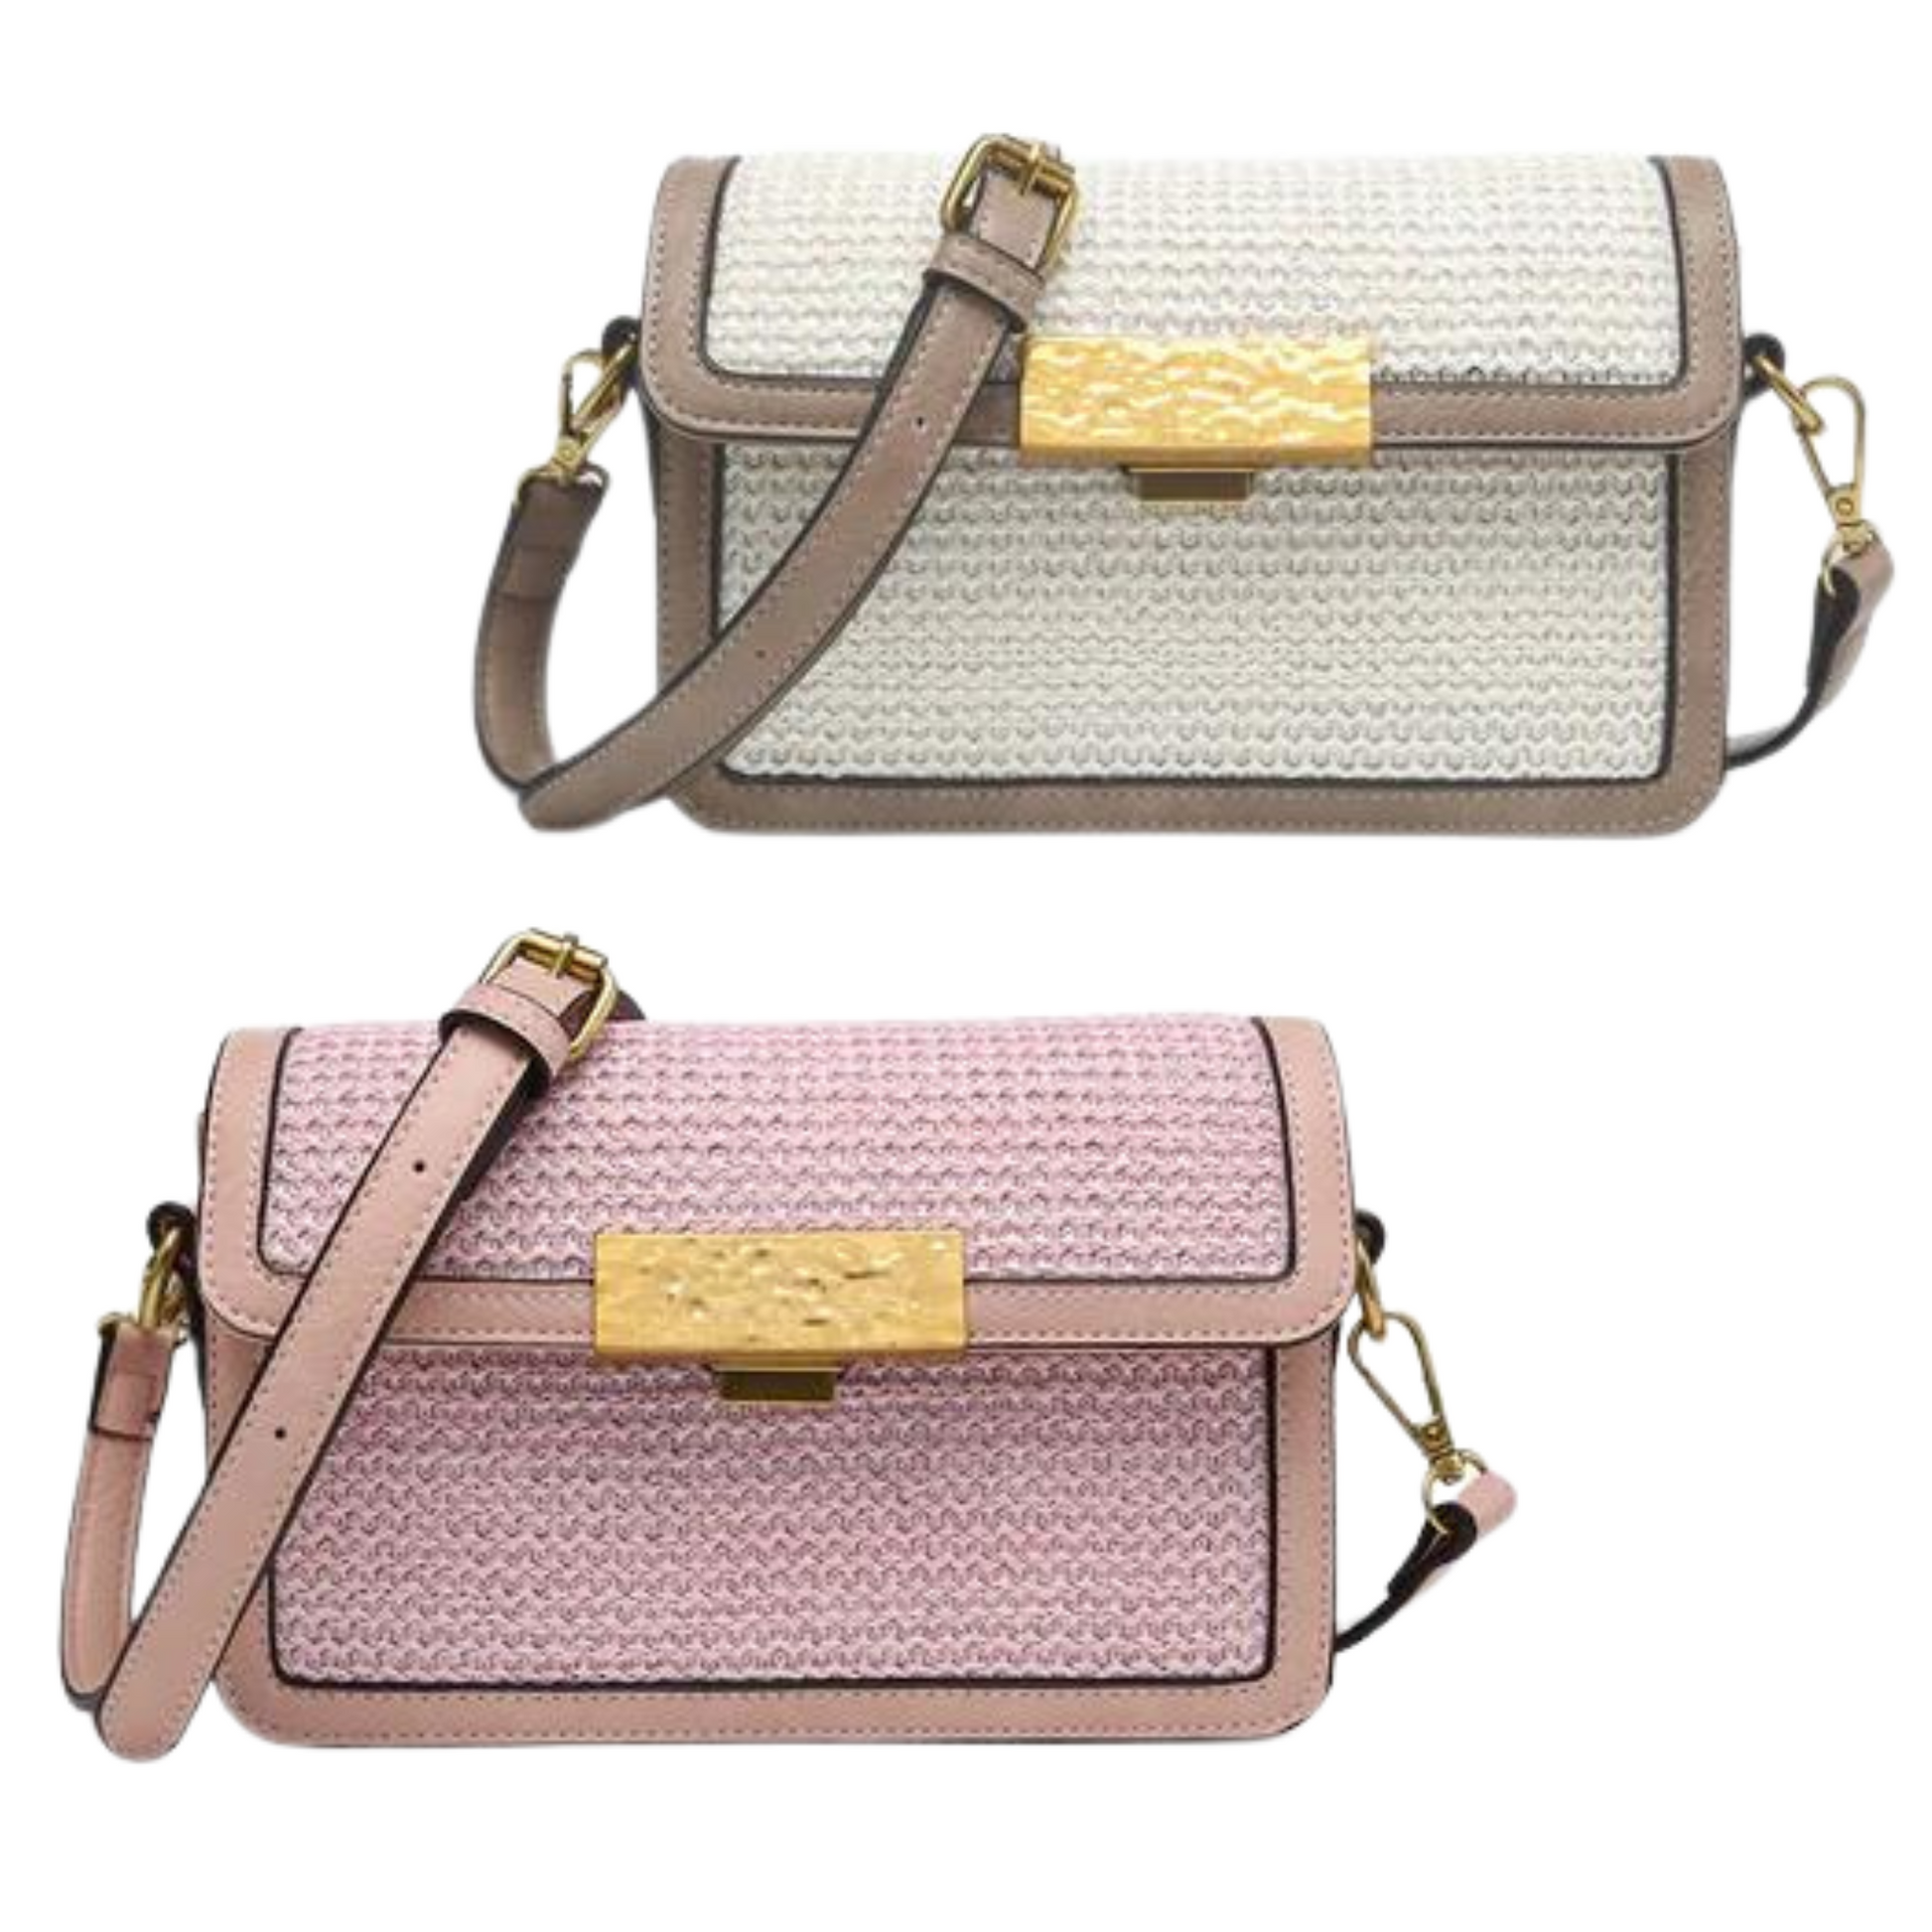 This Straw Crossbody with Lock is the perfect everyday accessory. Its small size keeps your essentials close and secure, while still maintaining a sophisticated and fashionable appearance. The purse comes in pink and cream, allowing you to choose a color that fits your style.